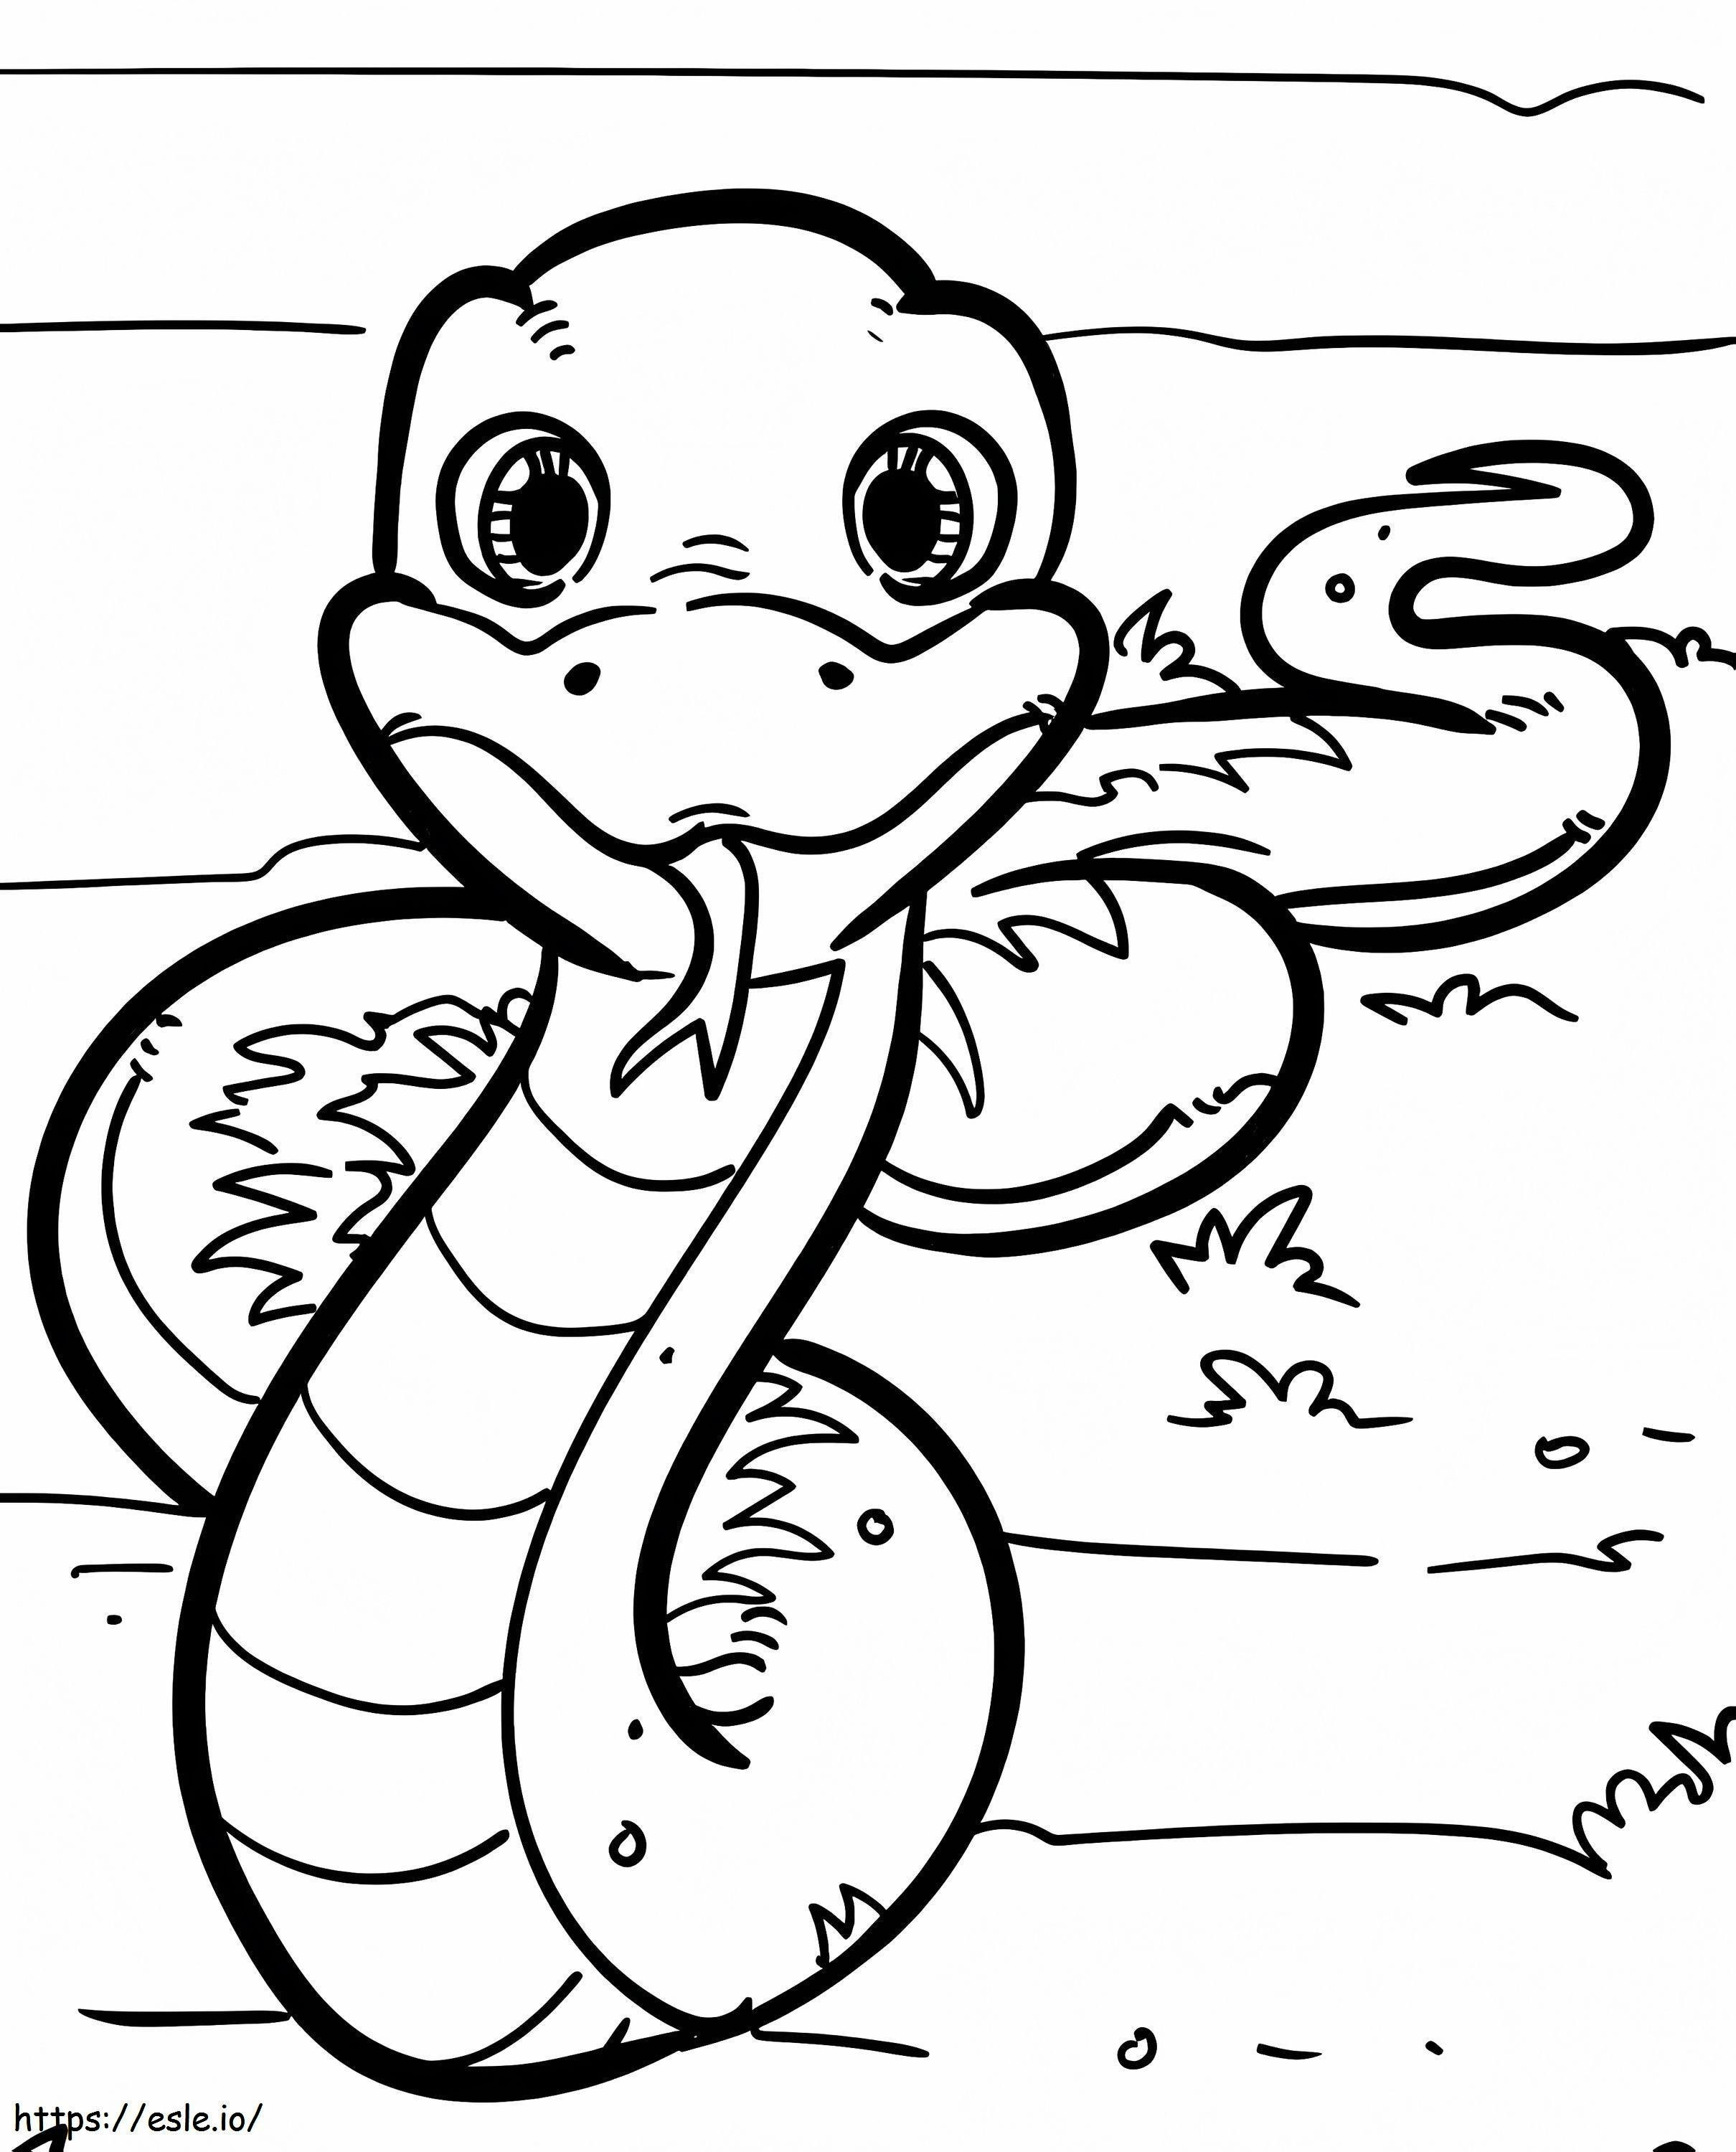 Adorable Snake coloring page